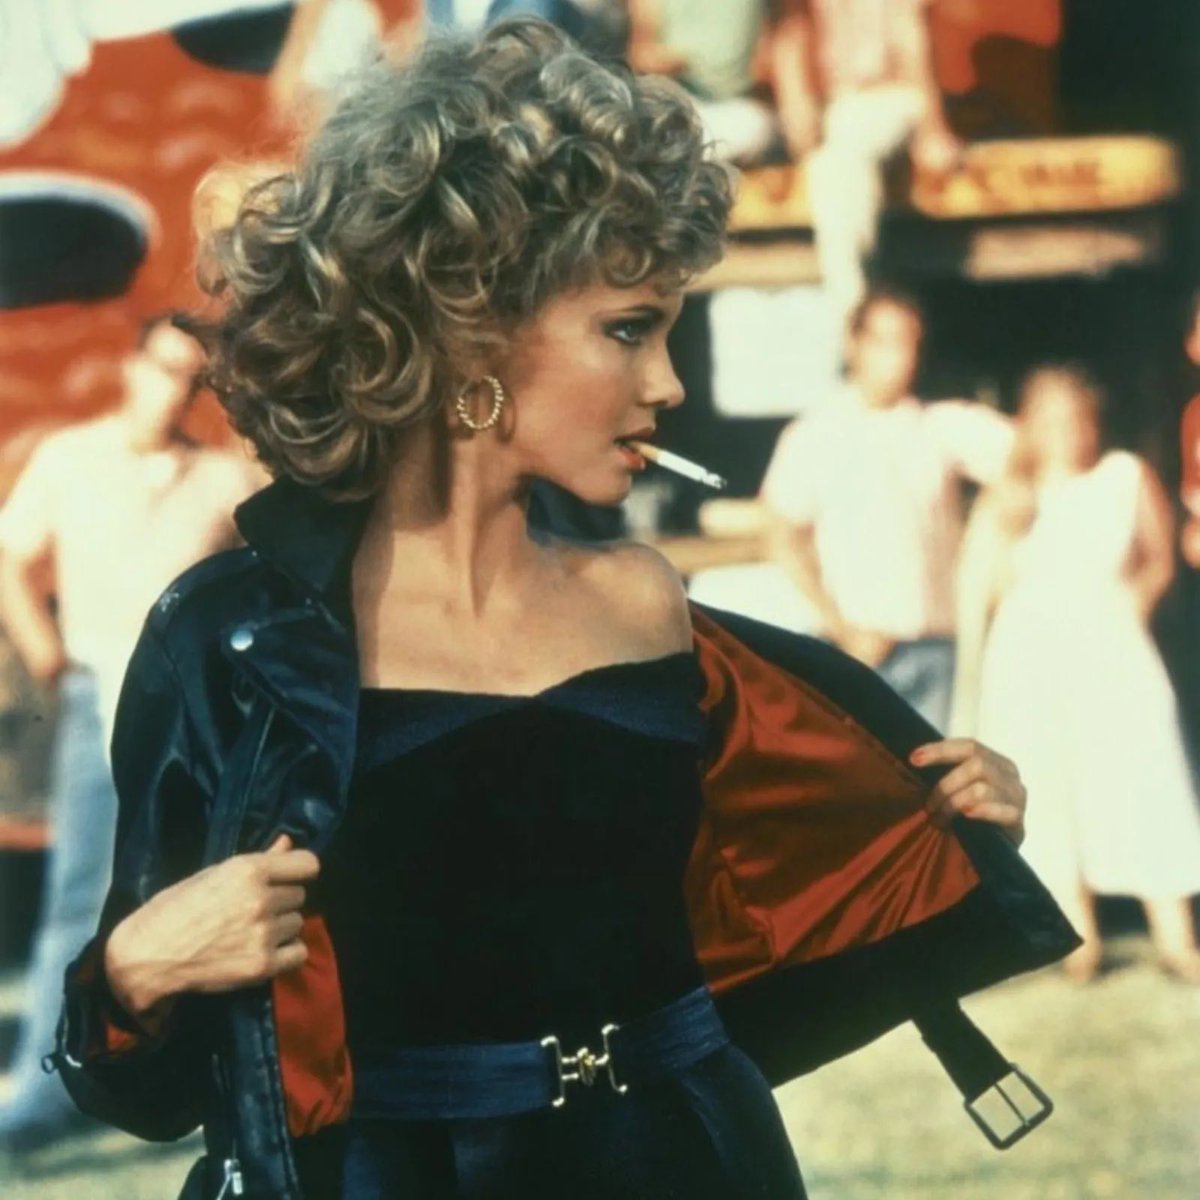 She was the one we all wanted. #OliviaNewtonJohn #Sandy #Grease